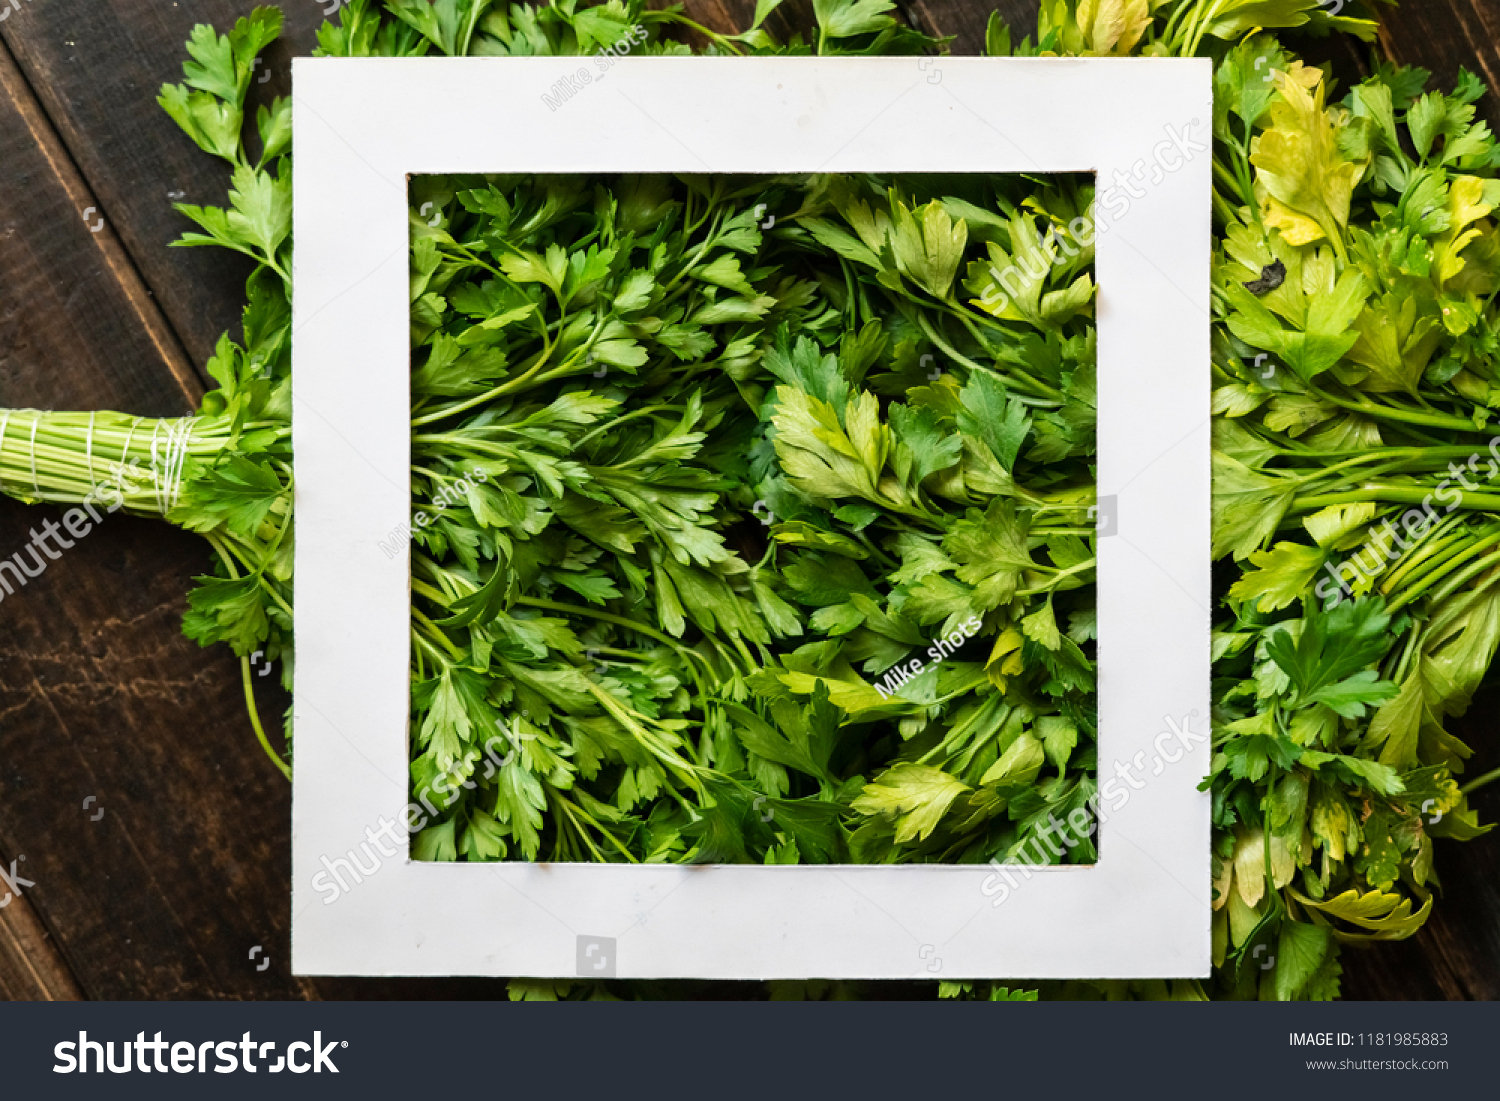 fresh raw green parsley herb bunch with white square frame on top copy space creative design #1181985883